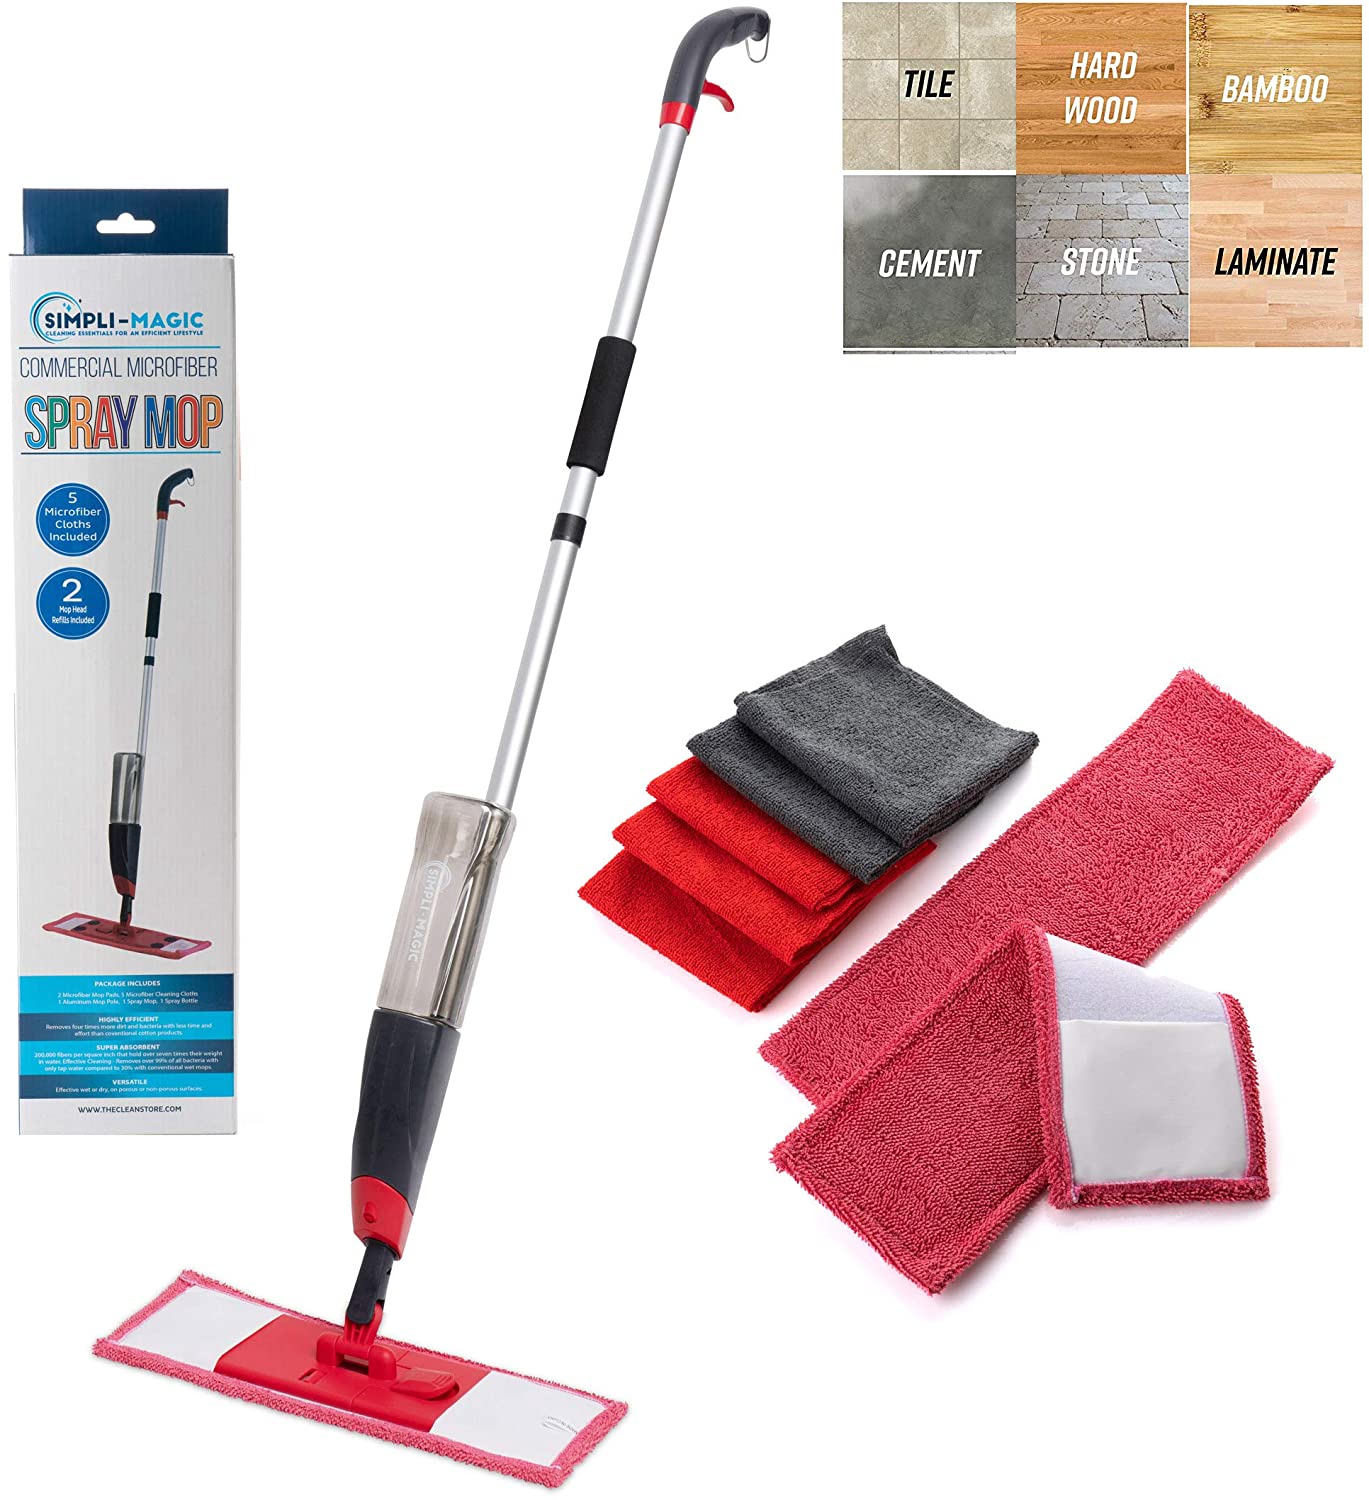 The Clean Store Black/Red Professional Flat Floor Mop and Bucket